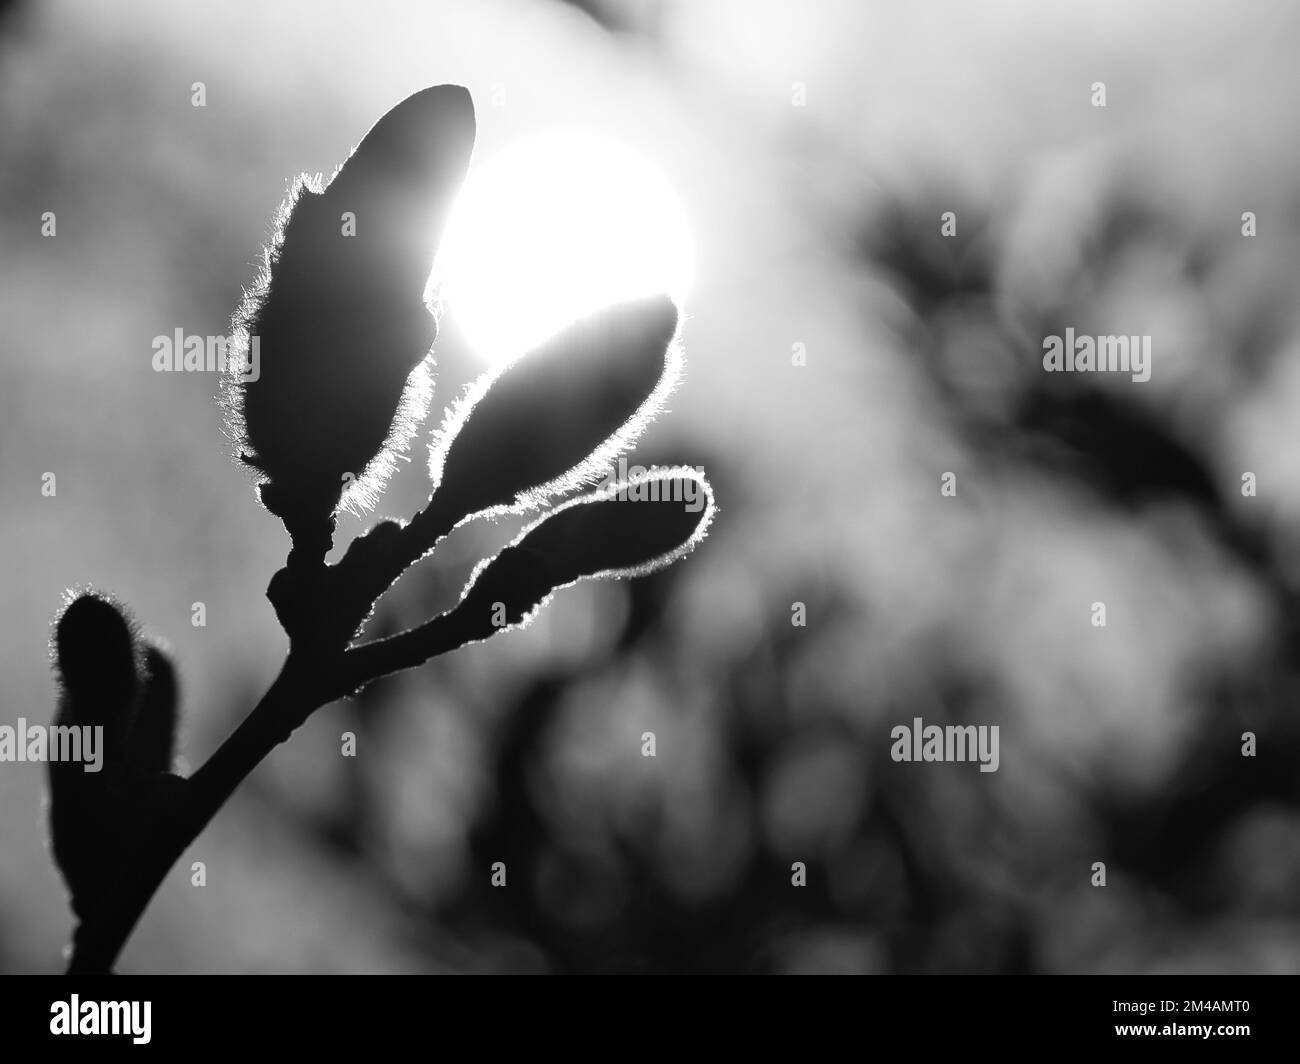 Magnolia buds on a magnolia tree taken in black and white with the moon in the background. Magnolia trees are a true splendor in the flowering season. Stock Photo